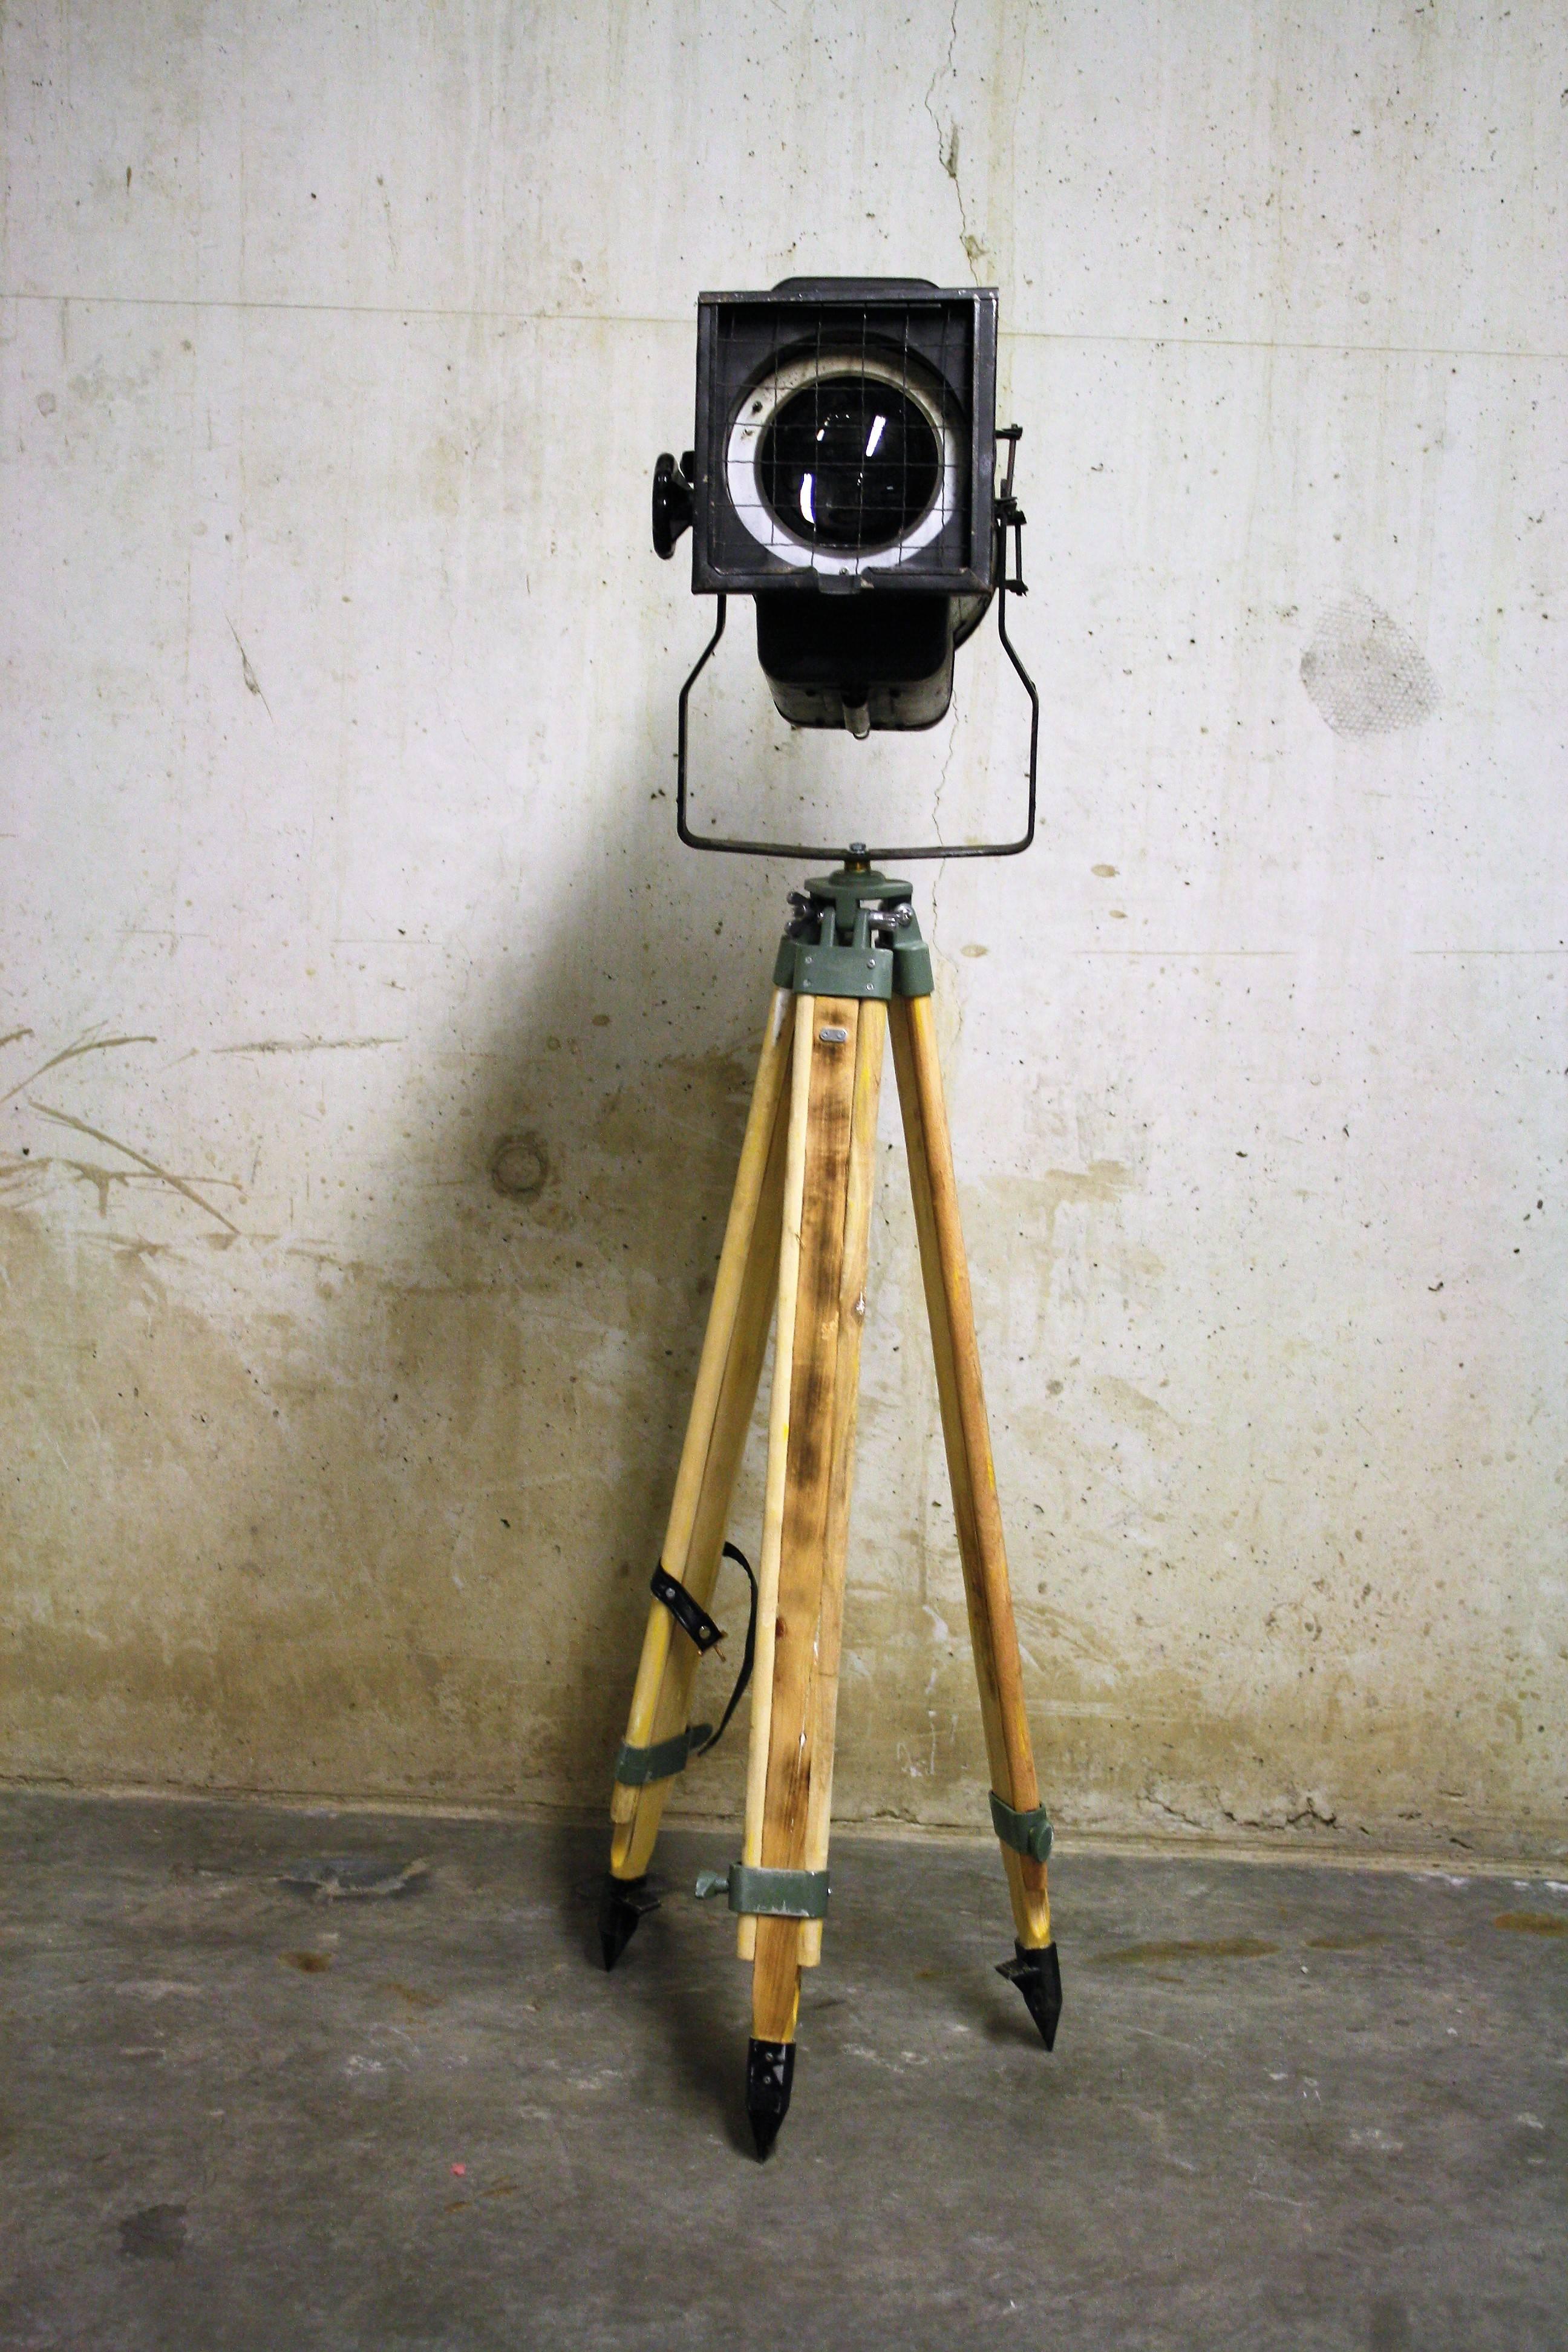 Vintage theater lamp on a wooden tripod.

This unique floor lamp looks great with modern day furniture, but will fit in perfectly in a vintage interior as well.

The height of the tripod is adjustable and the spot can be turned and set to shine